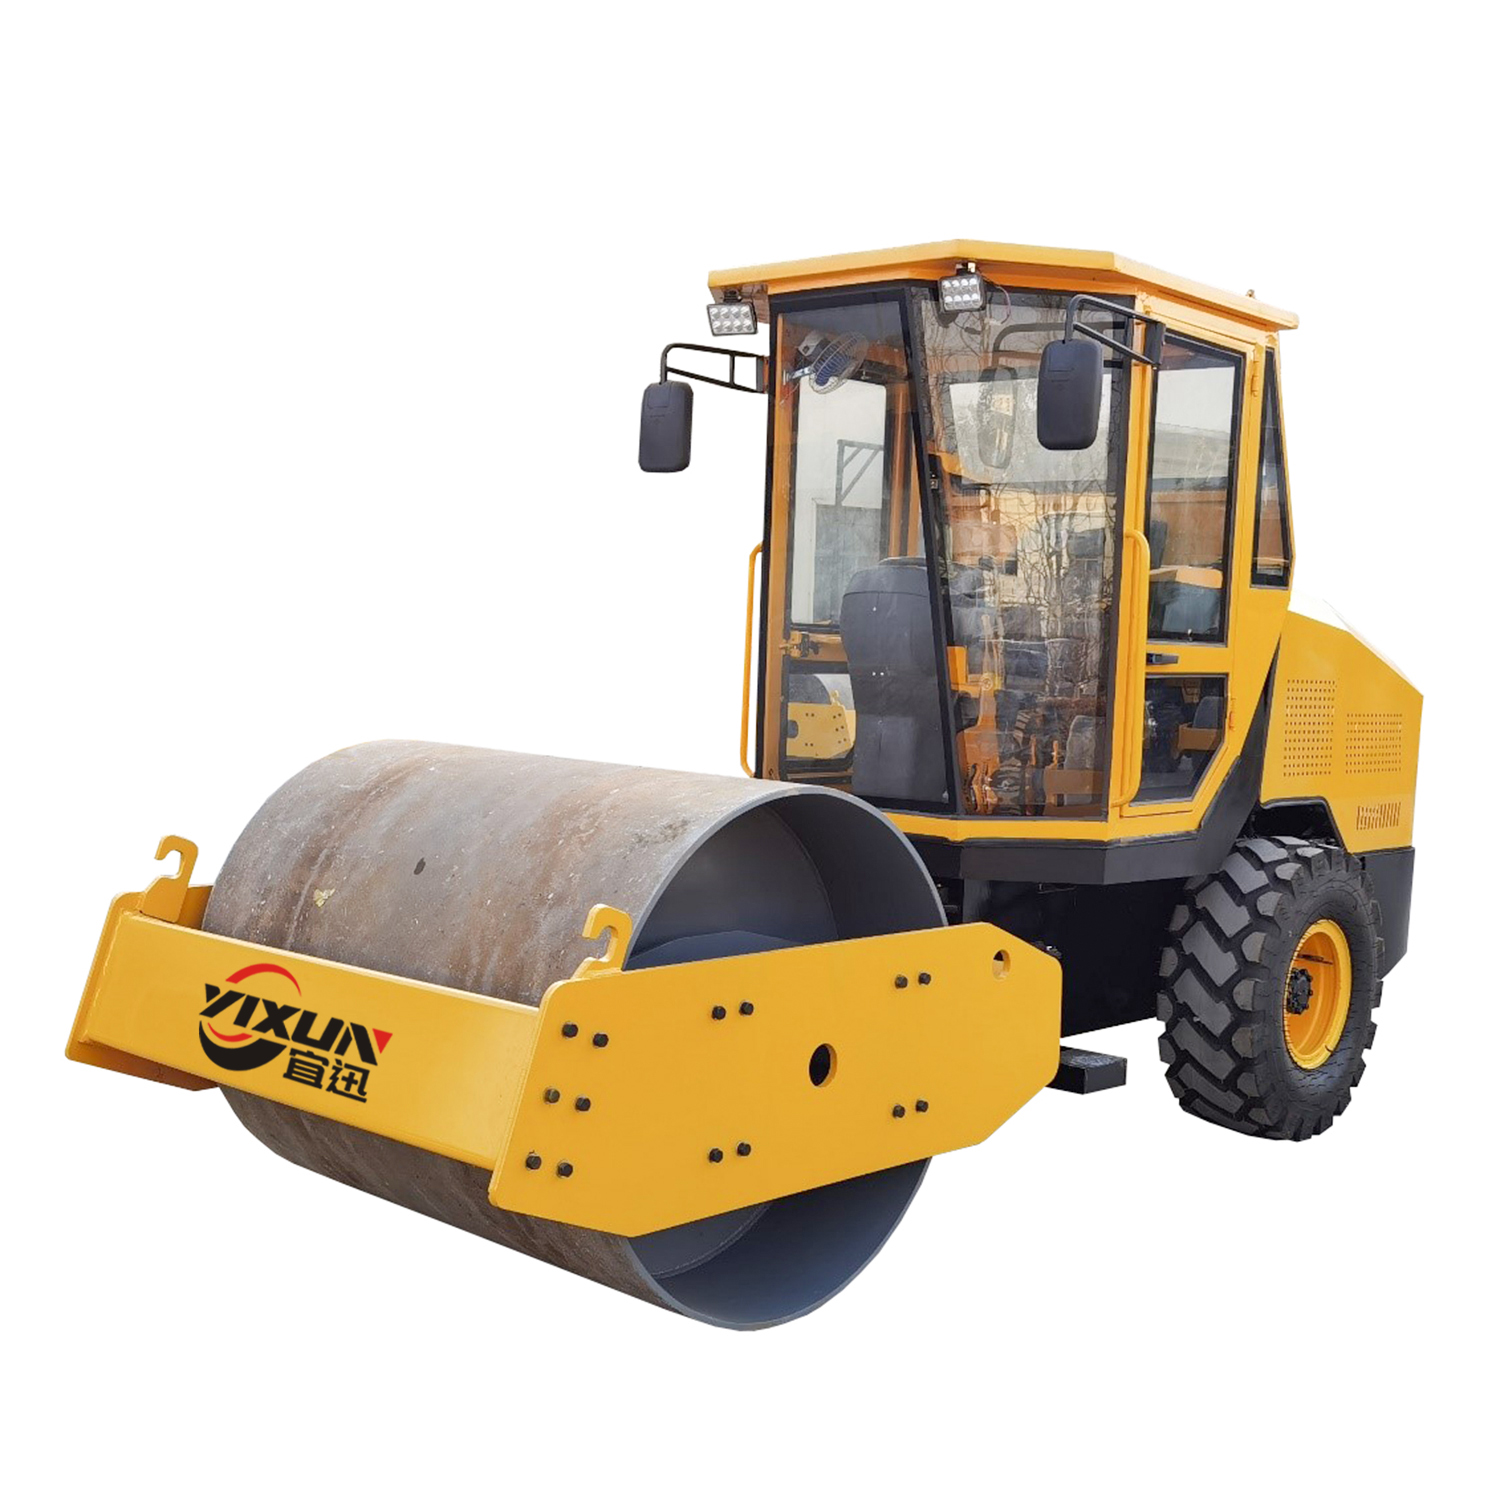 YIXUN High quality 6ton single drum vibratory compactor road roller road construction machinery price